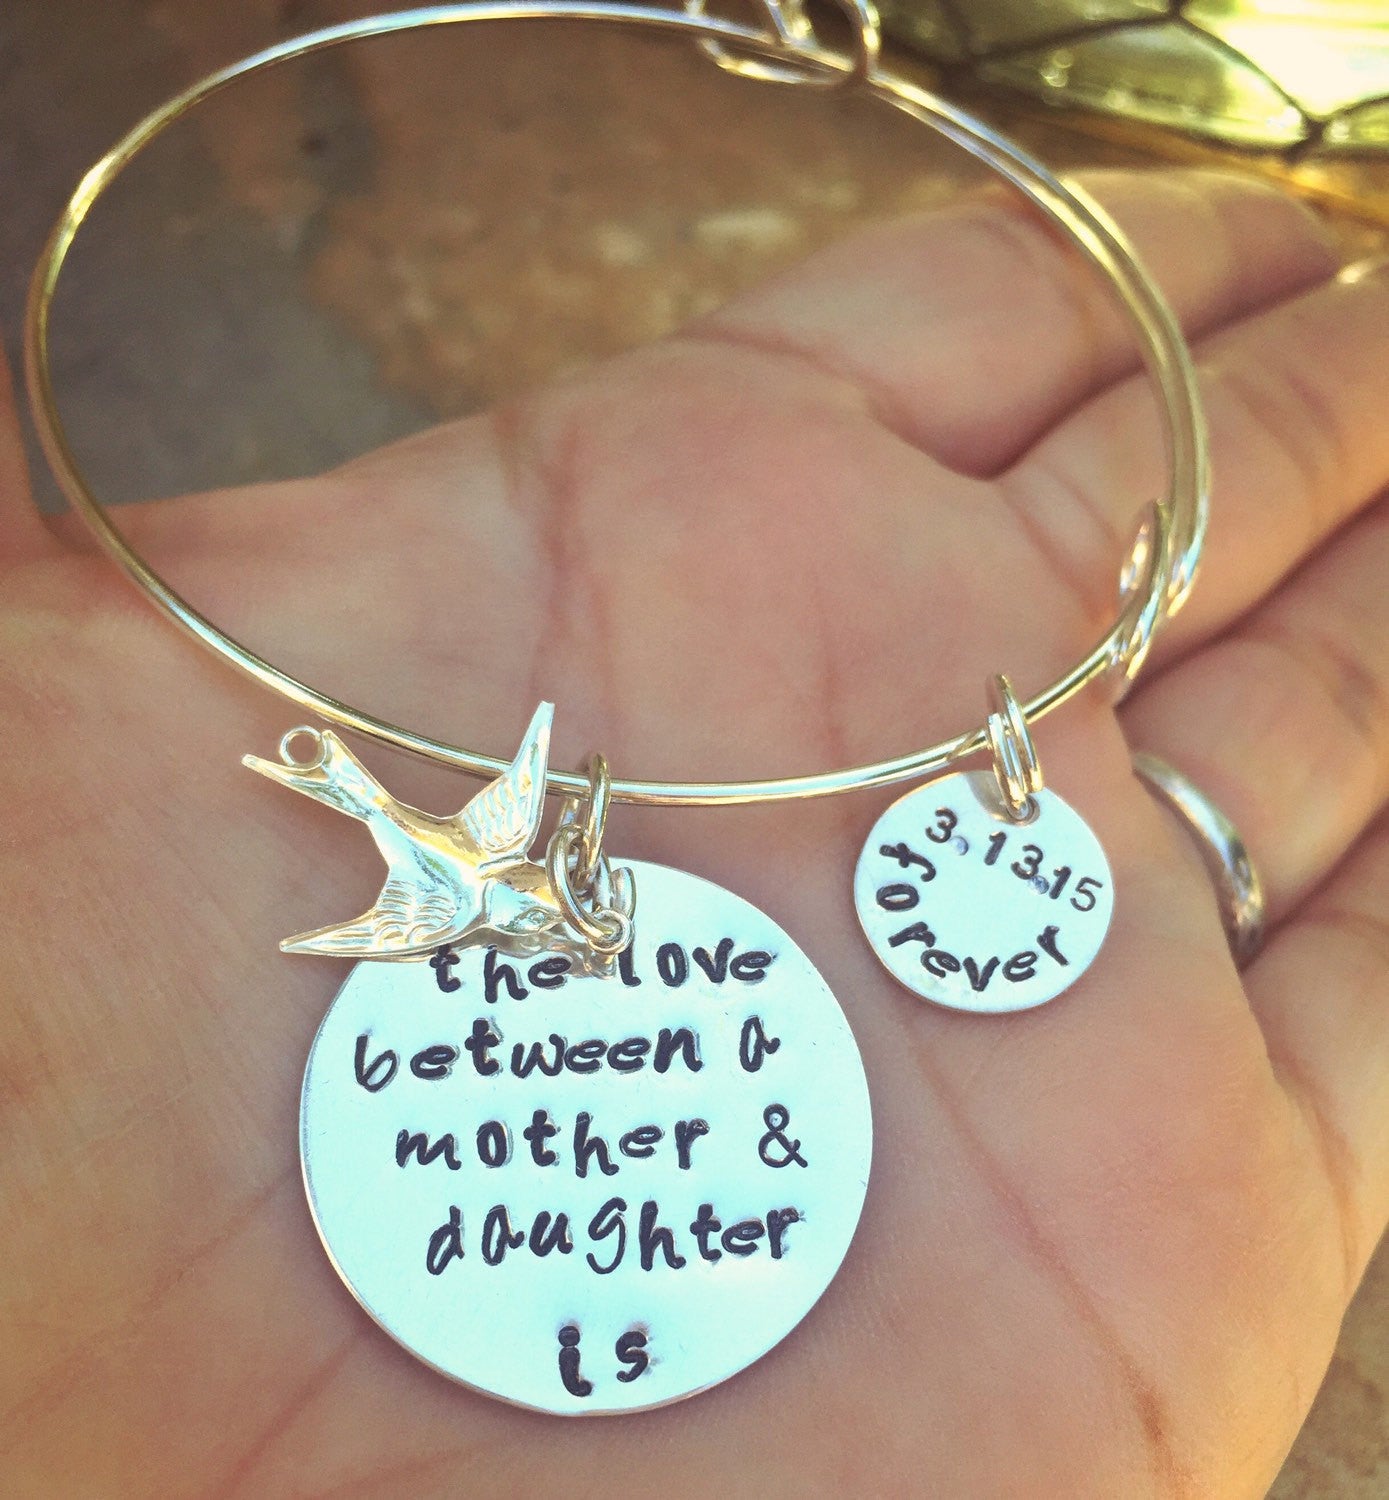 The Love Between A Mother And Daughter Is Forever, Mother Daughter Bracelet, Personalized Bracelets, natashaaloha - Natashaaloha, jewelry, bracelets, necklace, keychains, fishing lures, gifts for men, charms, personalized, 